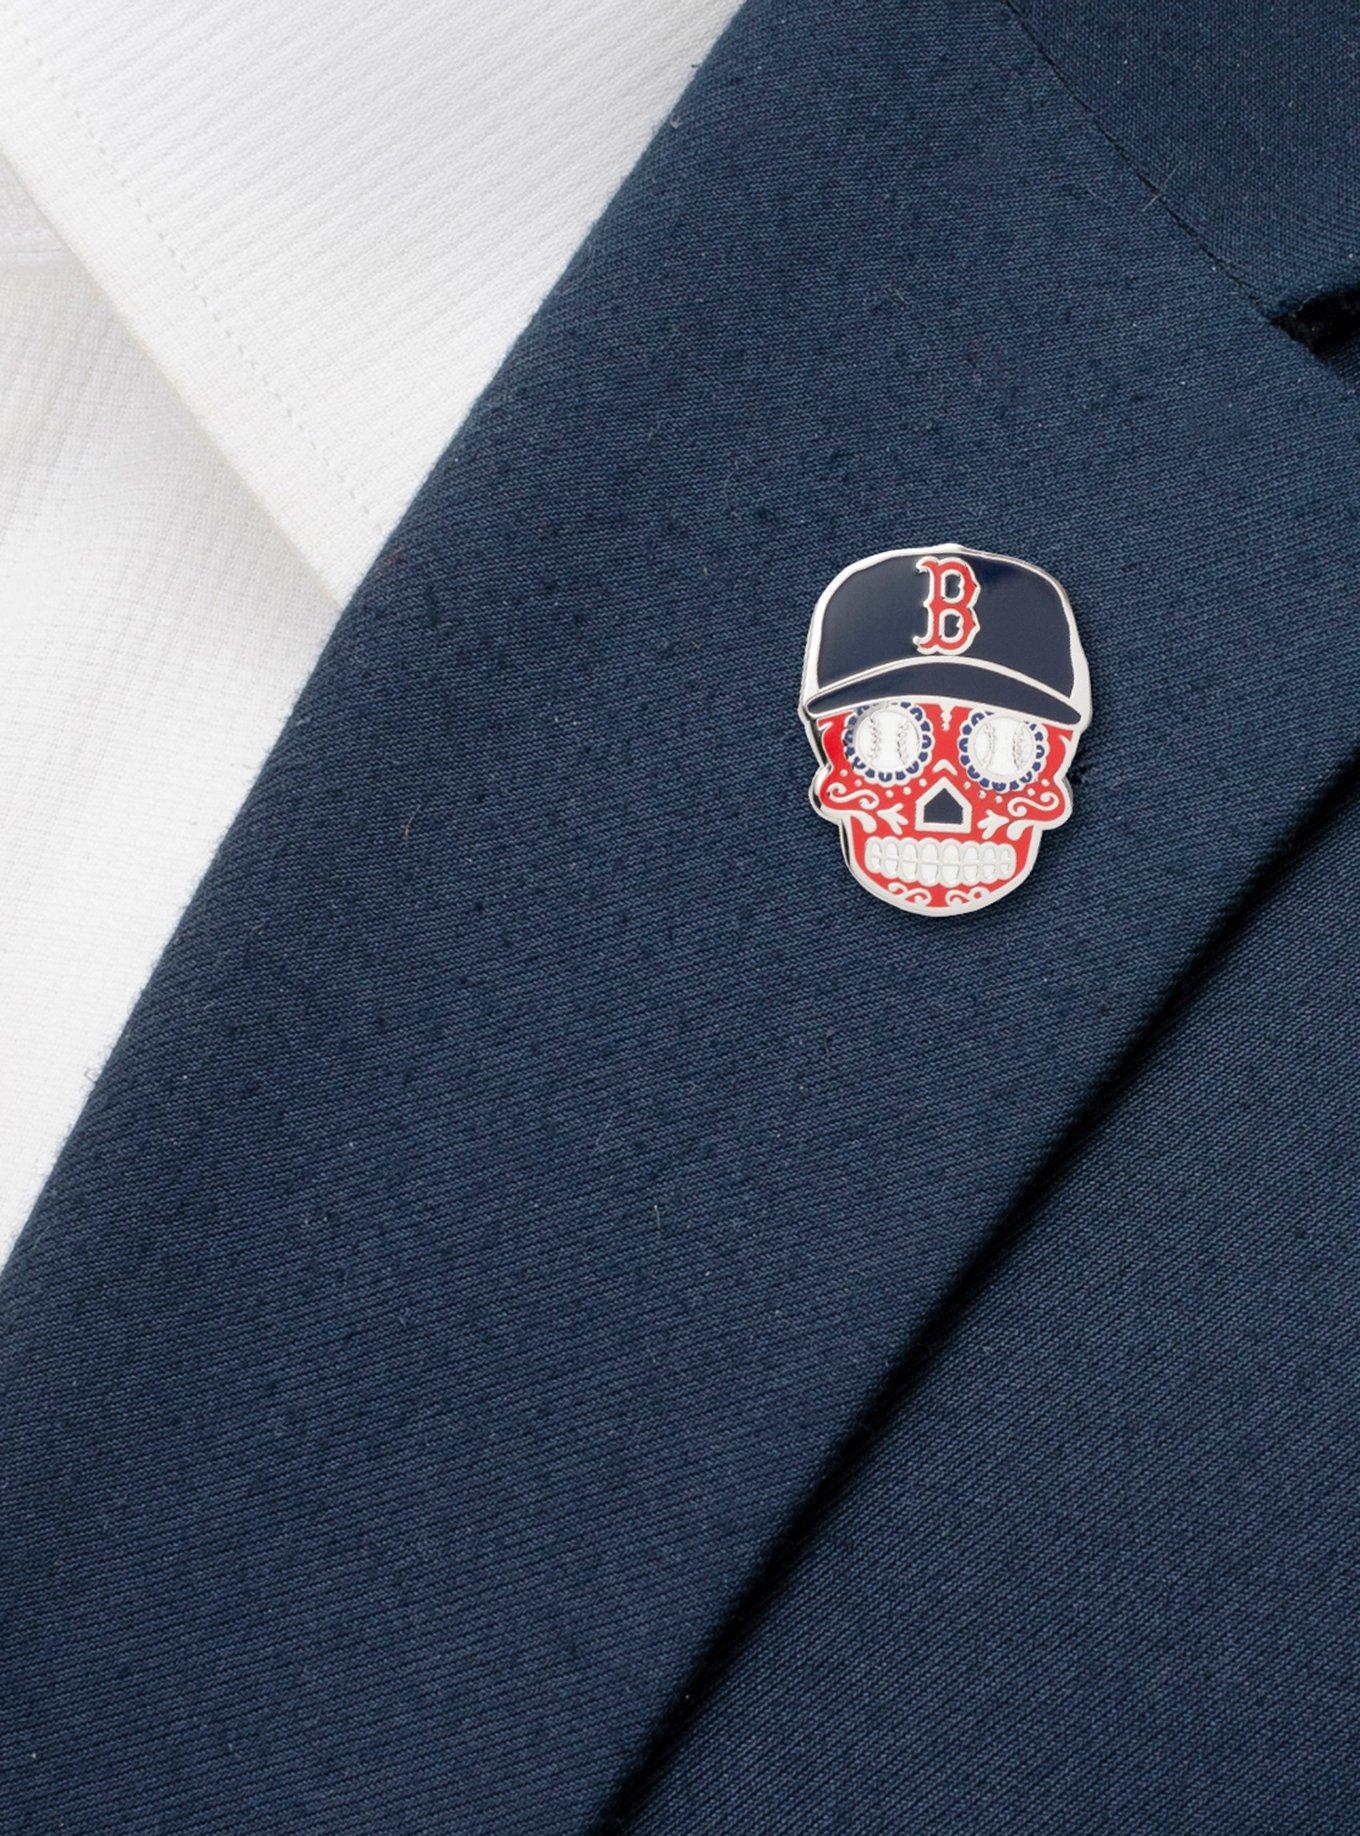 Pin on Boston Red Sox